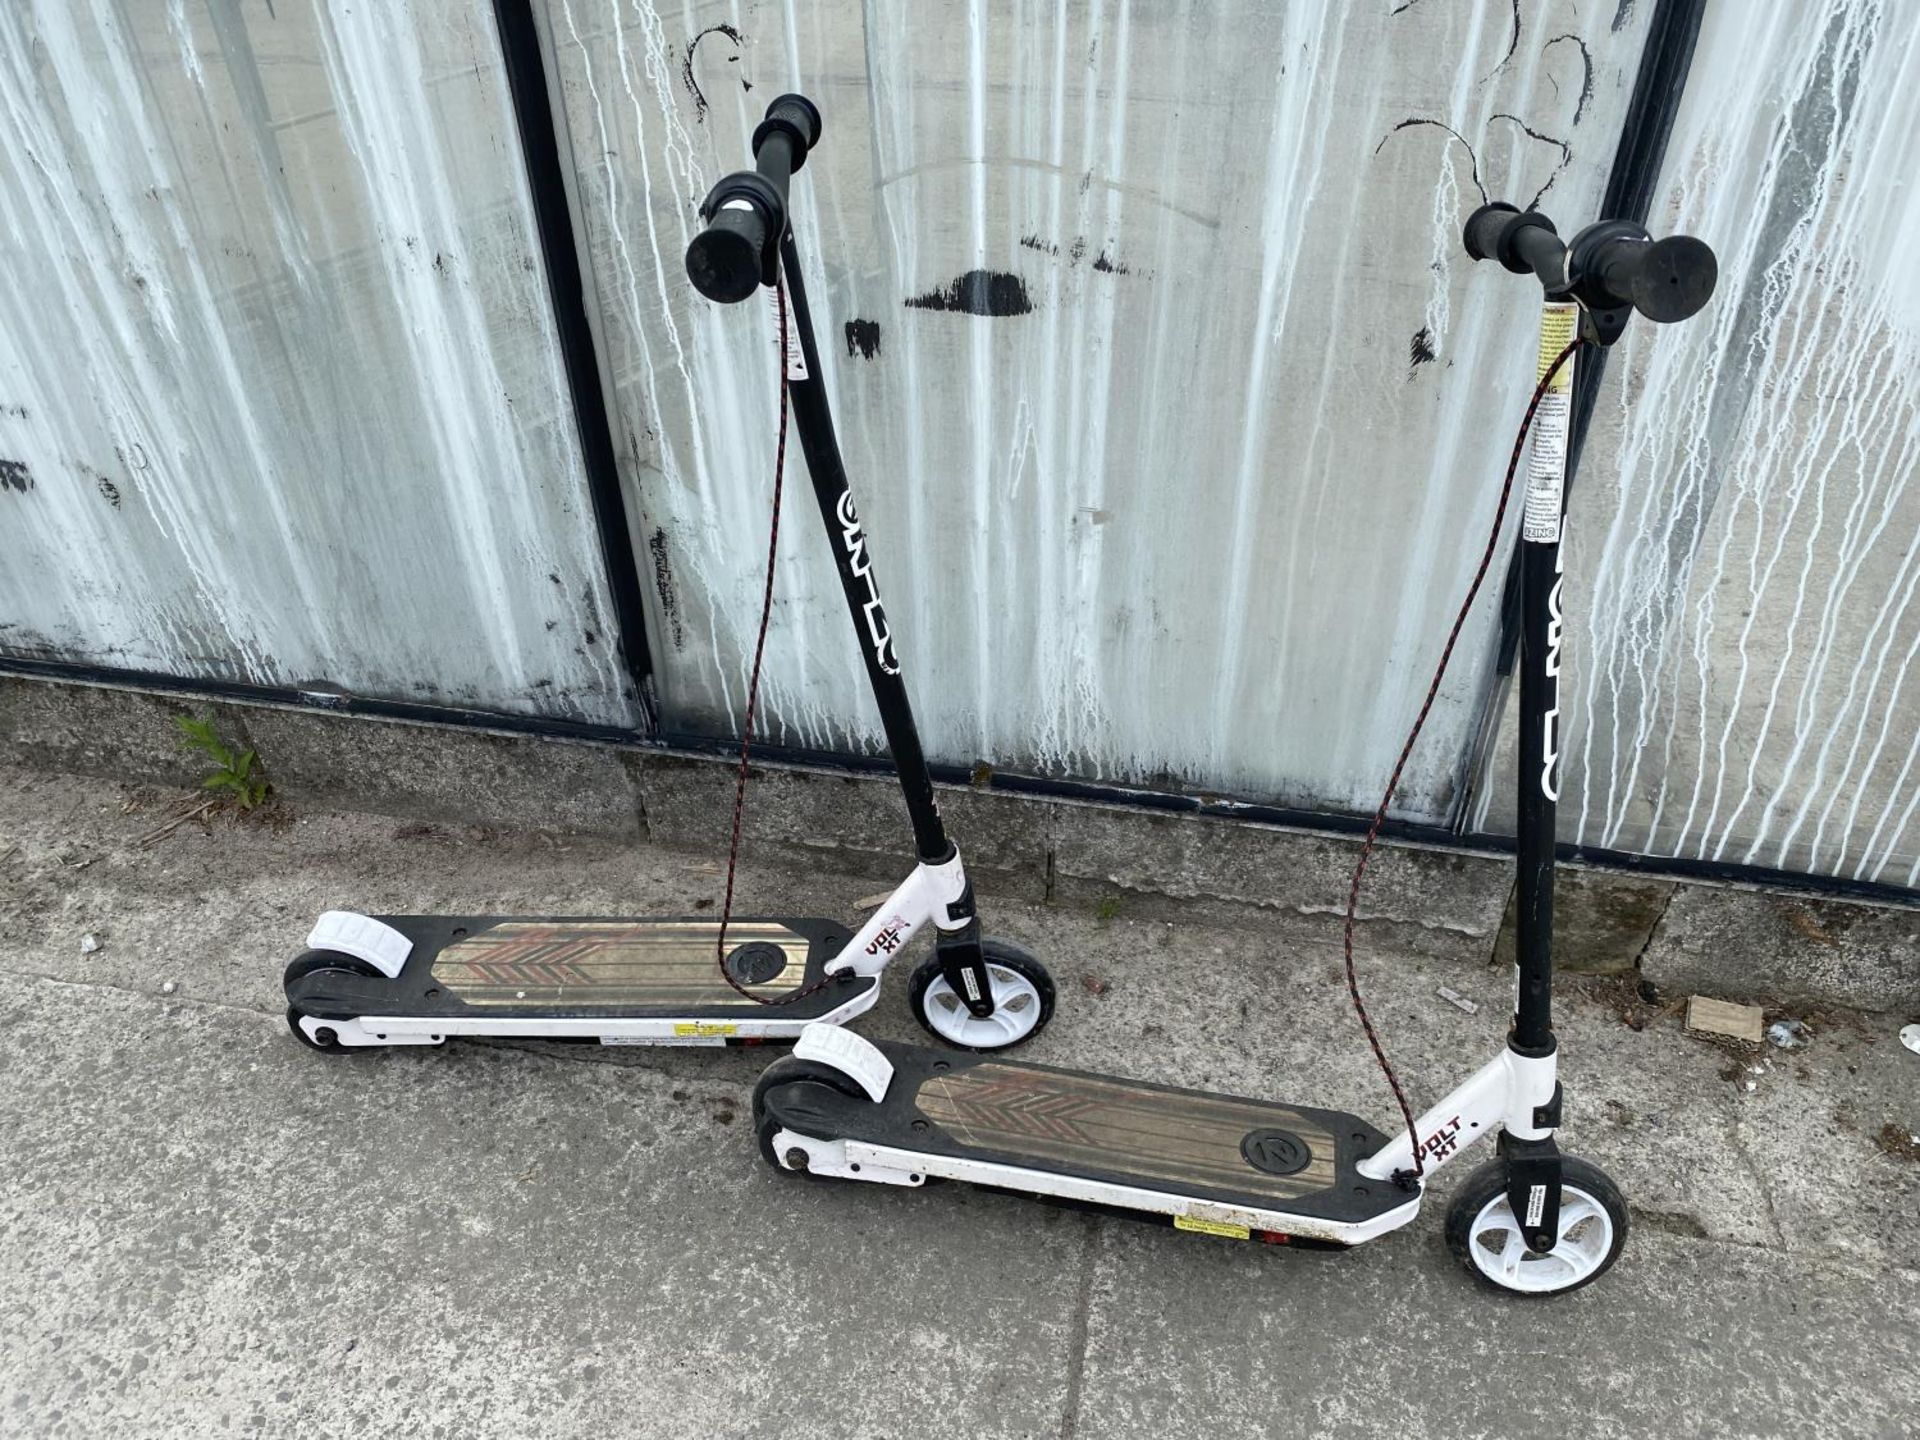 TWO CHILDRENS ZINC SCOOTERS